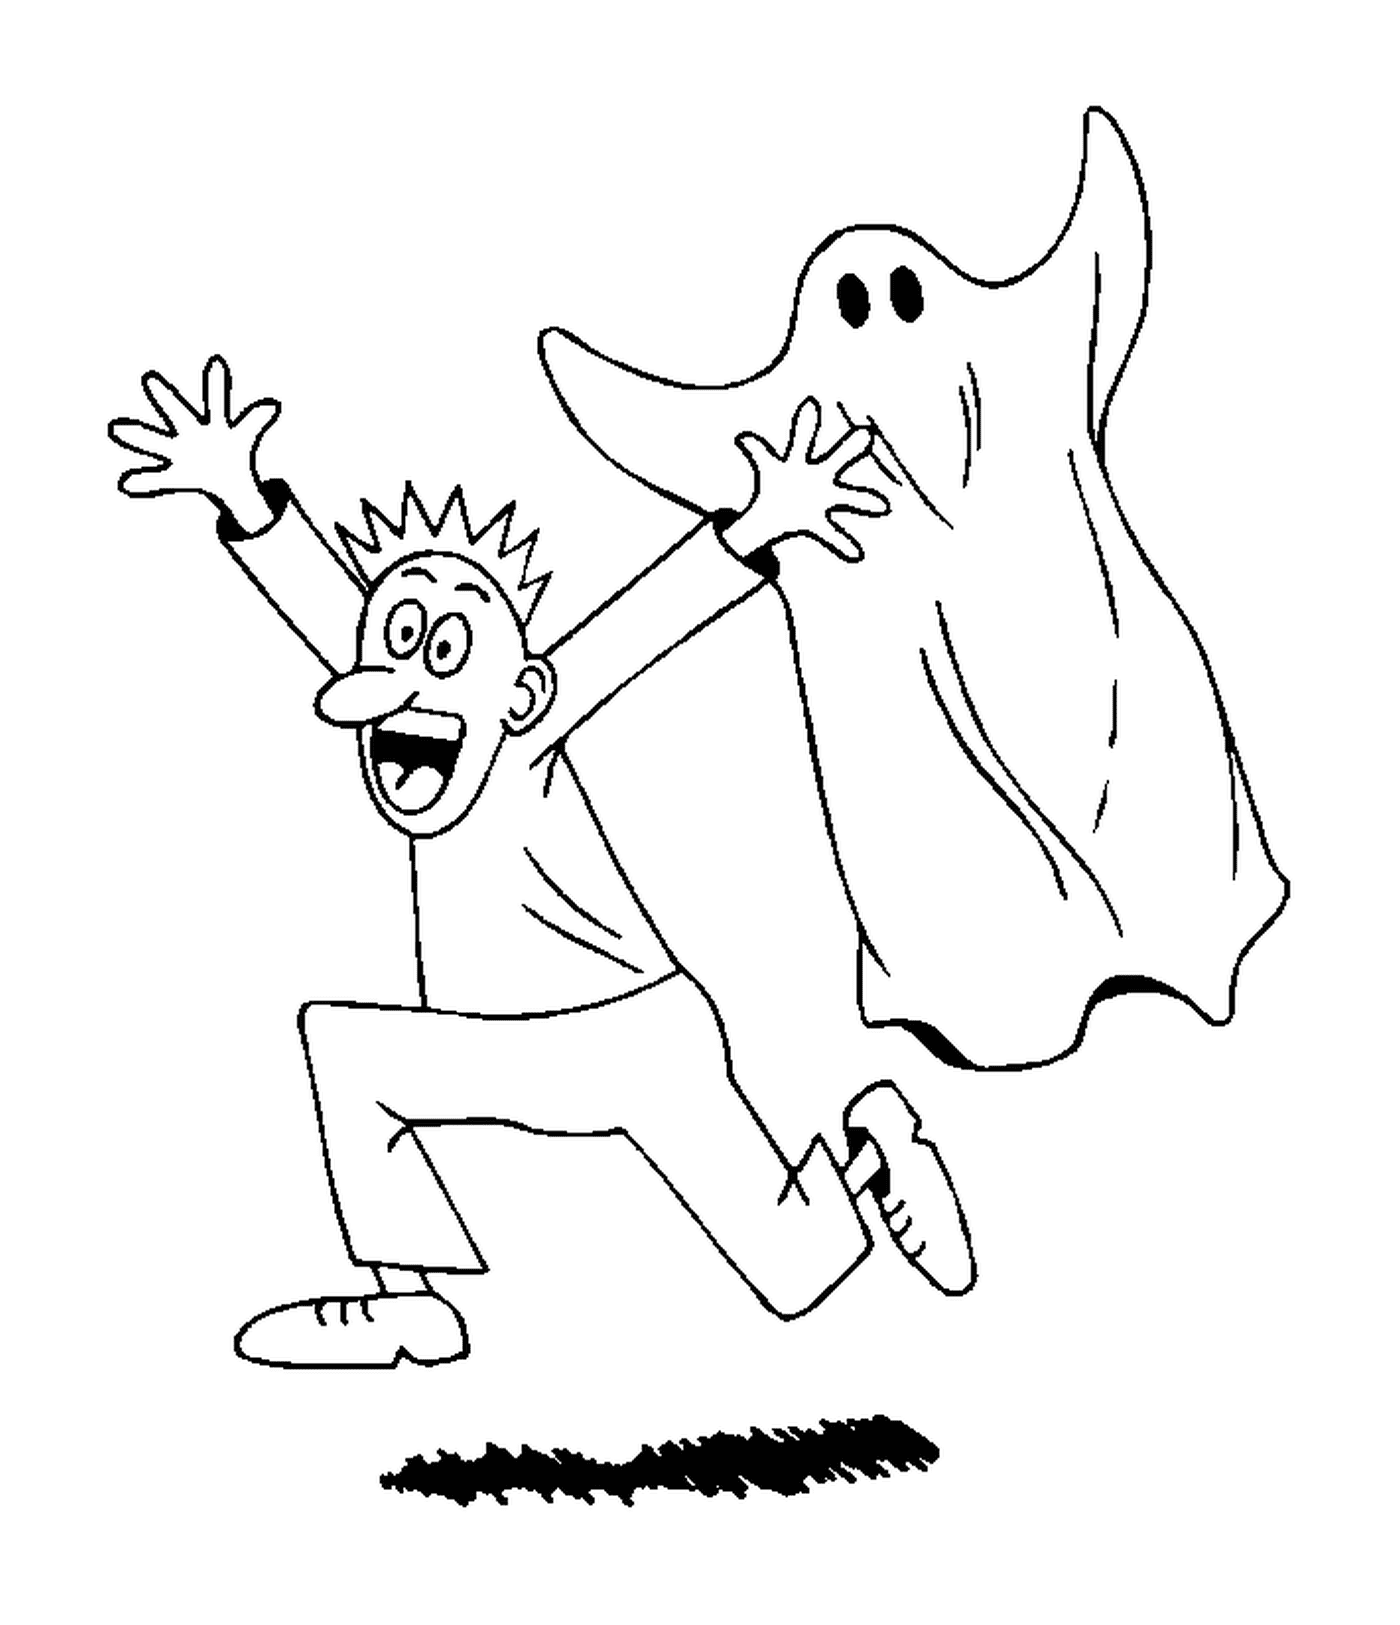  A human being chased by a ghost 